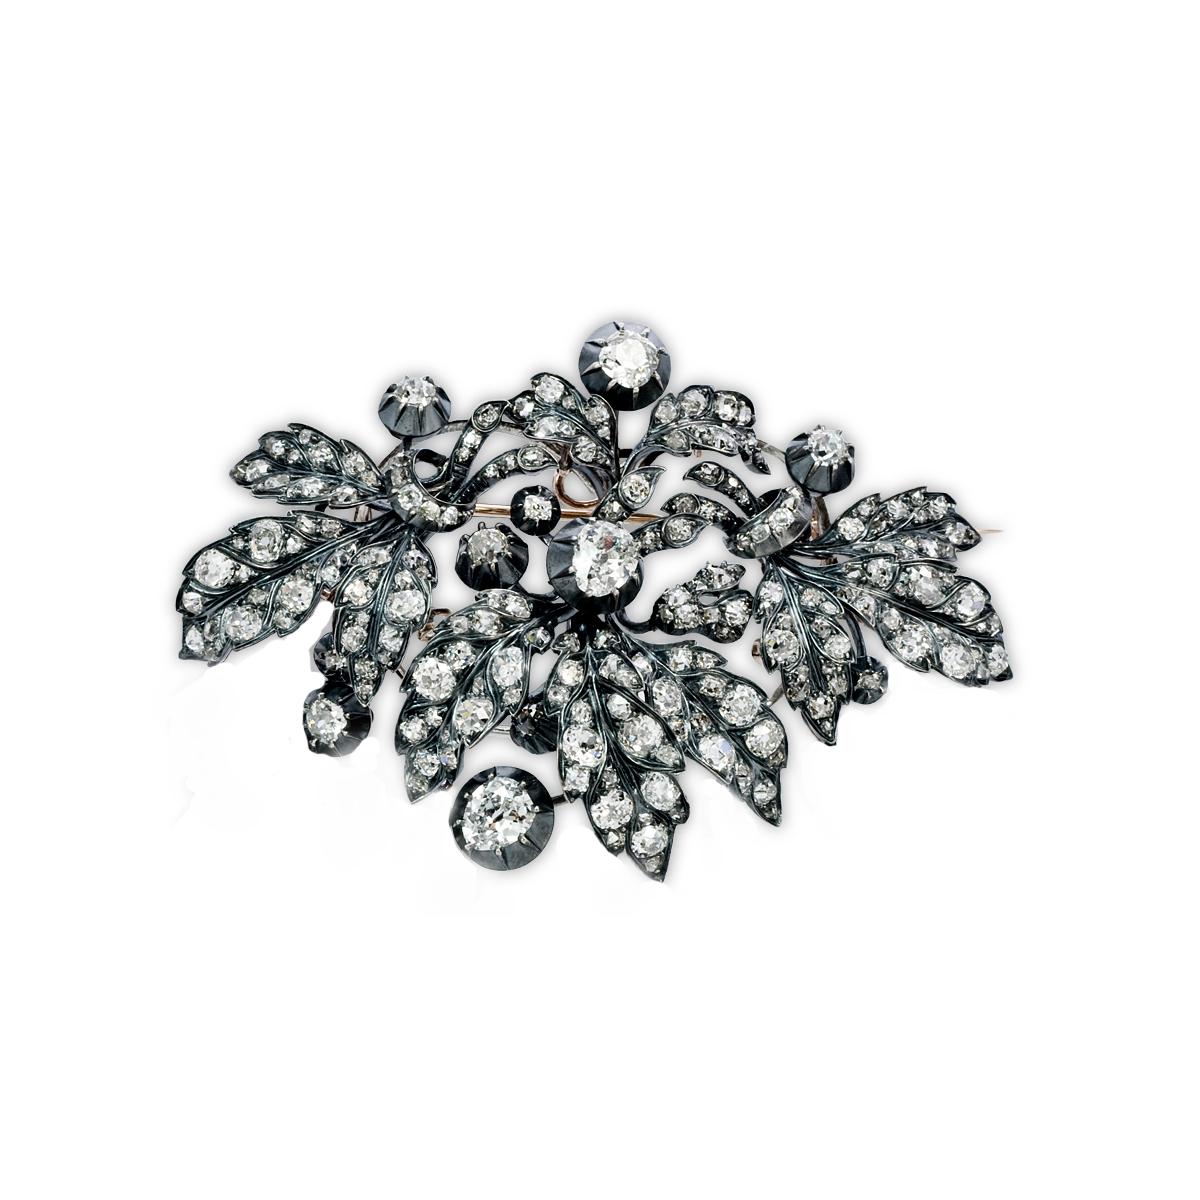 Important 19th Century Diamond Corsage Brooch
18K Gold, Silver and Diamond Floral Brooch, 386 Old Mine Cut Diamonds approximately 45ct; Ca1860 
(Wysteria vines are removable)